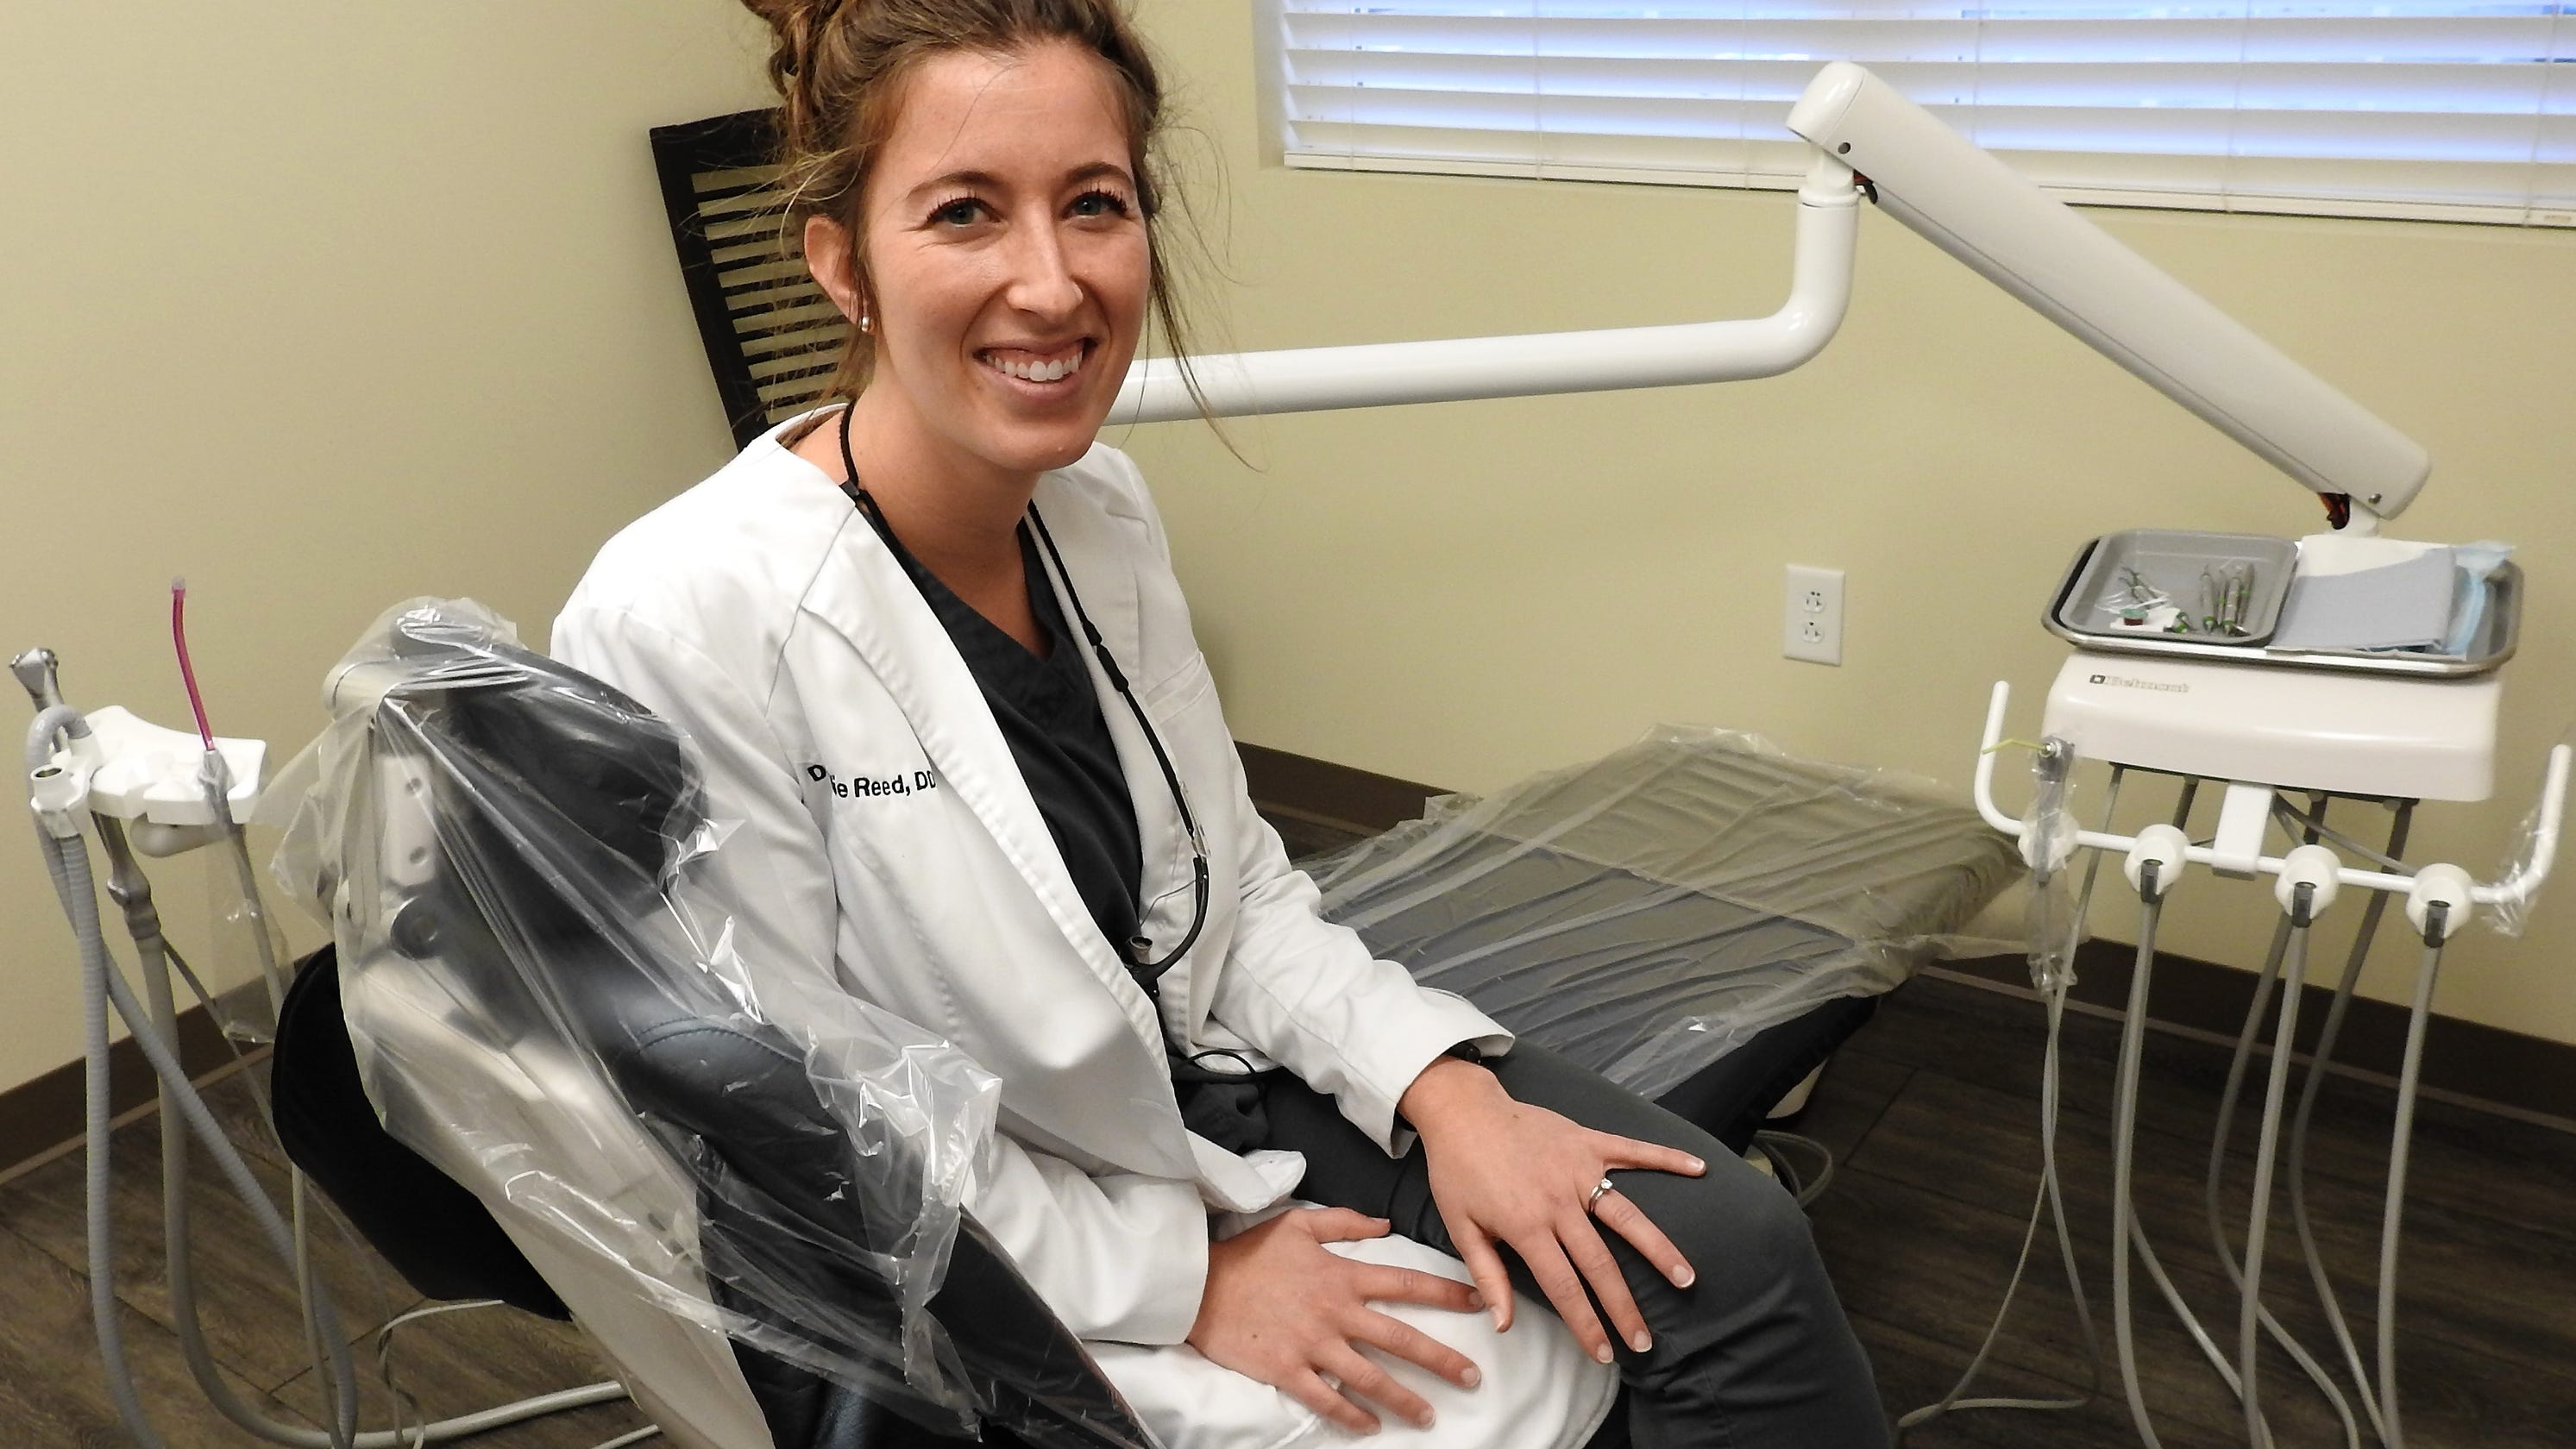 Allison Reed is happy to be a small town dentist in Coshocton